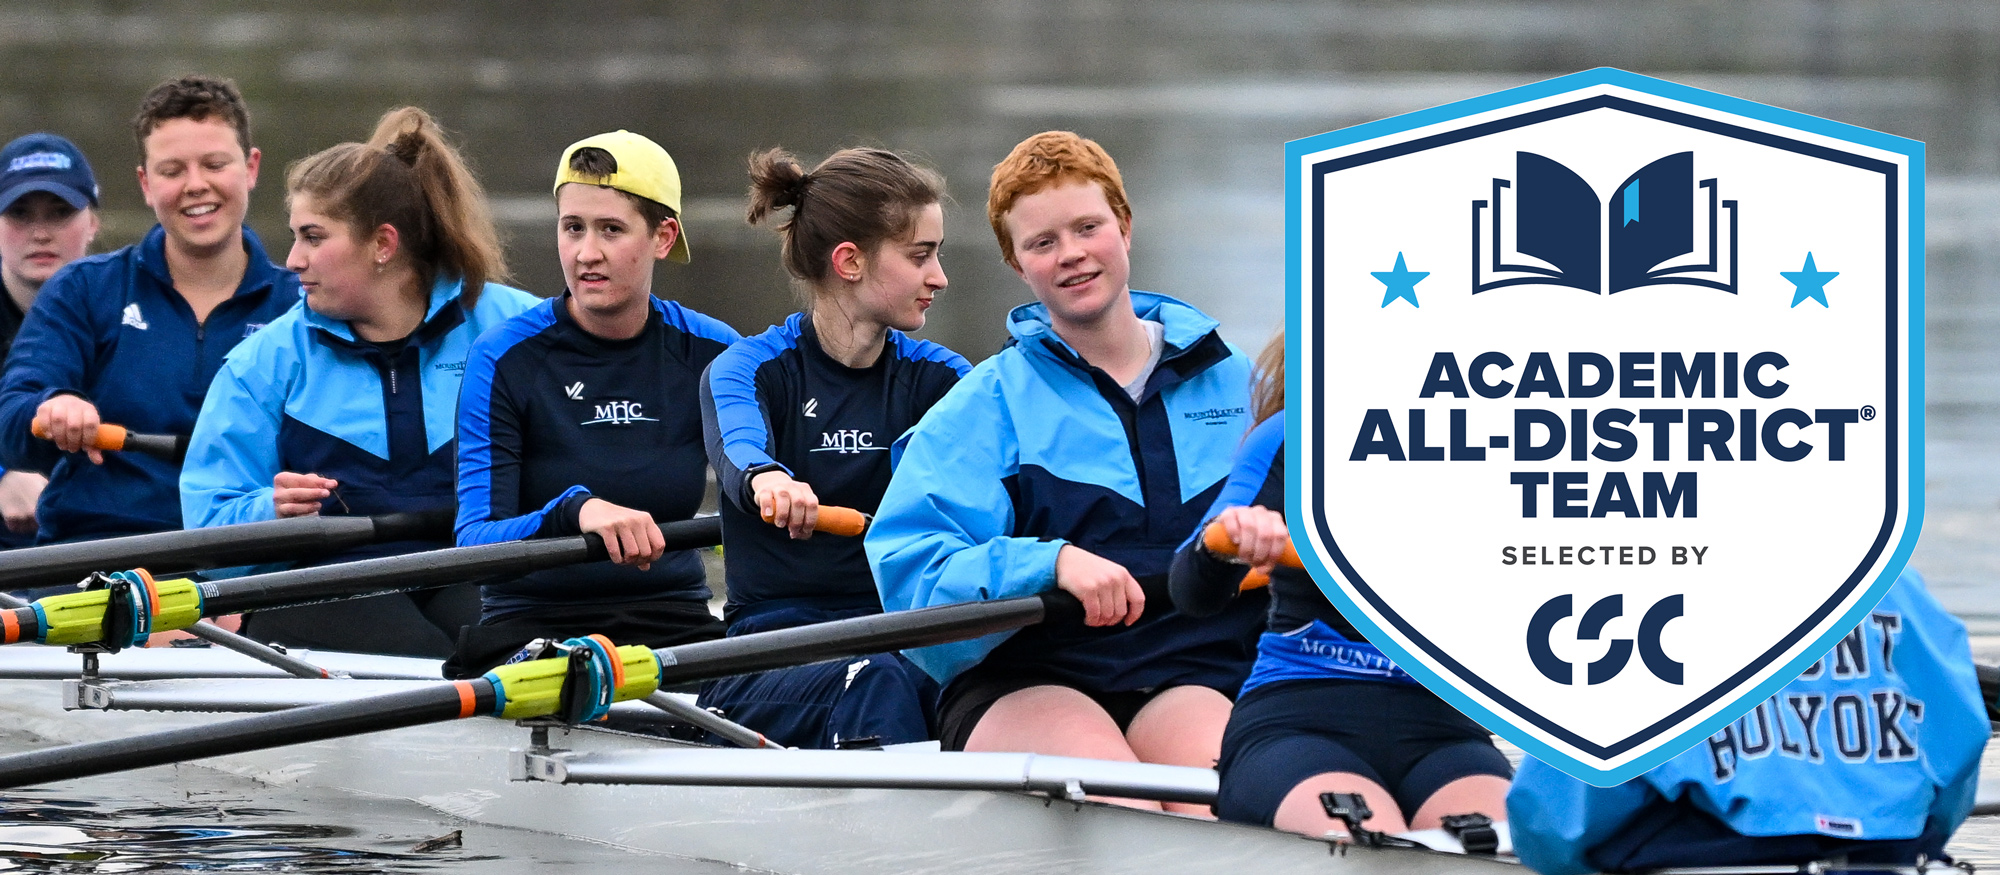 Three members of the Mount Holyoke College rowing team received Academic All-District At-Large honors, announced May 25, 2023 by College Sports Communicators (formerly CoSIDA), in Jocelyn Greer (left), Piper LaPointe (center), and Emma Waldron (right). (RJB Sports file photo)